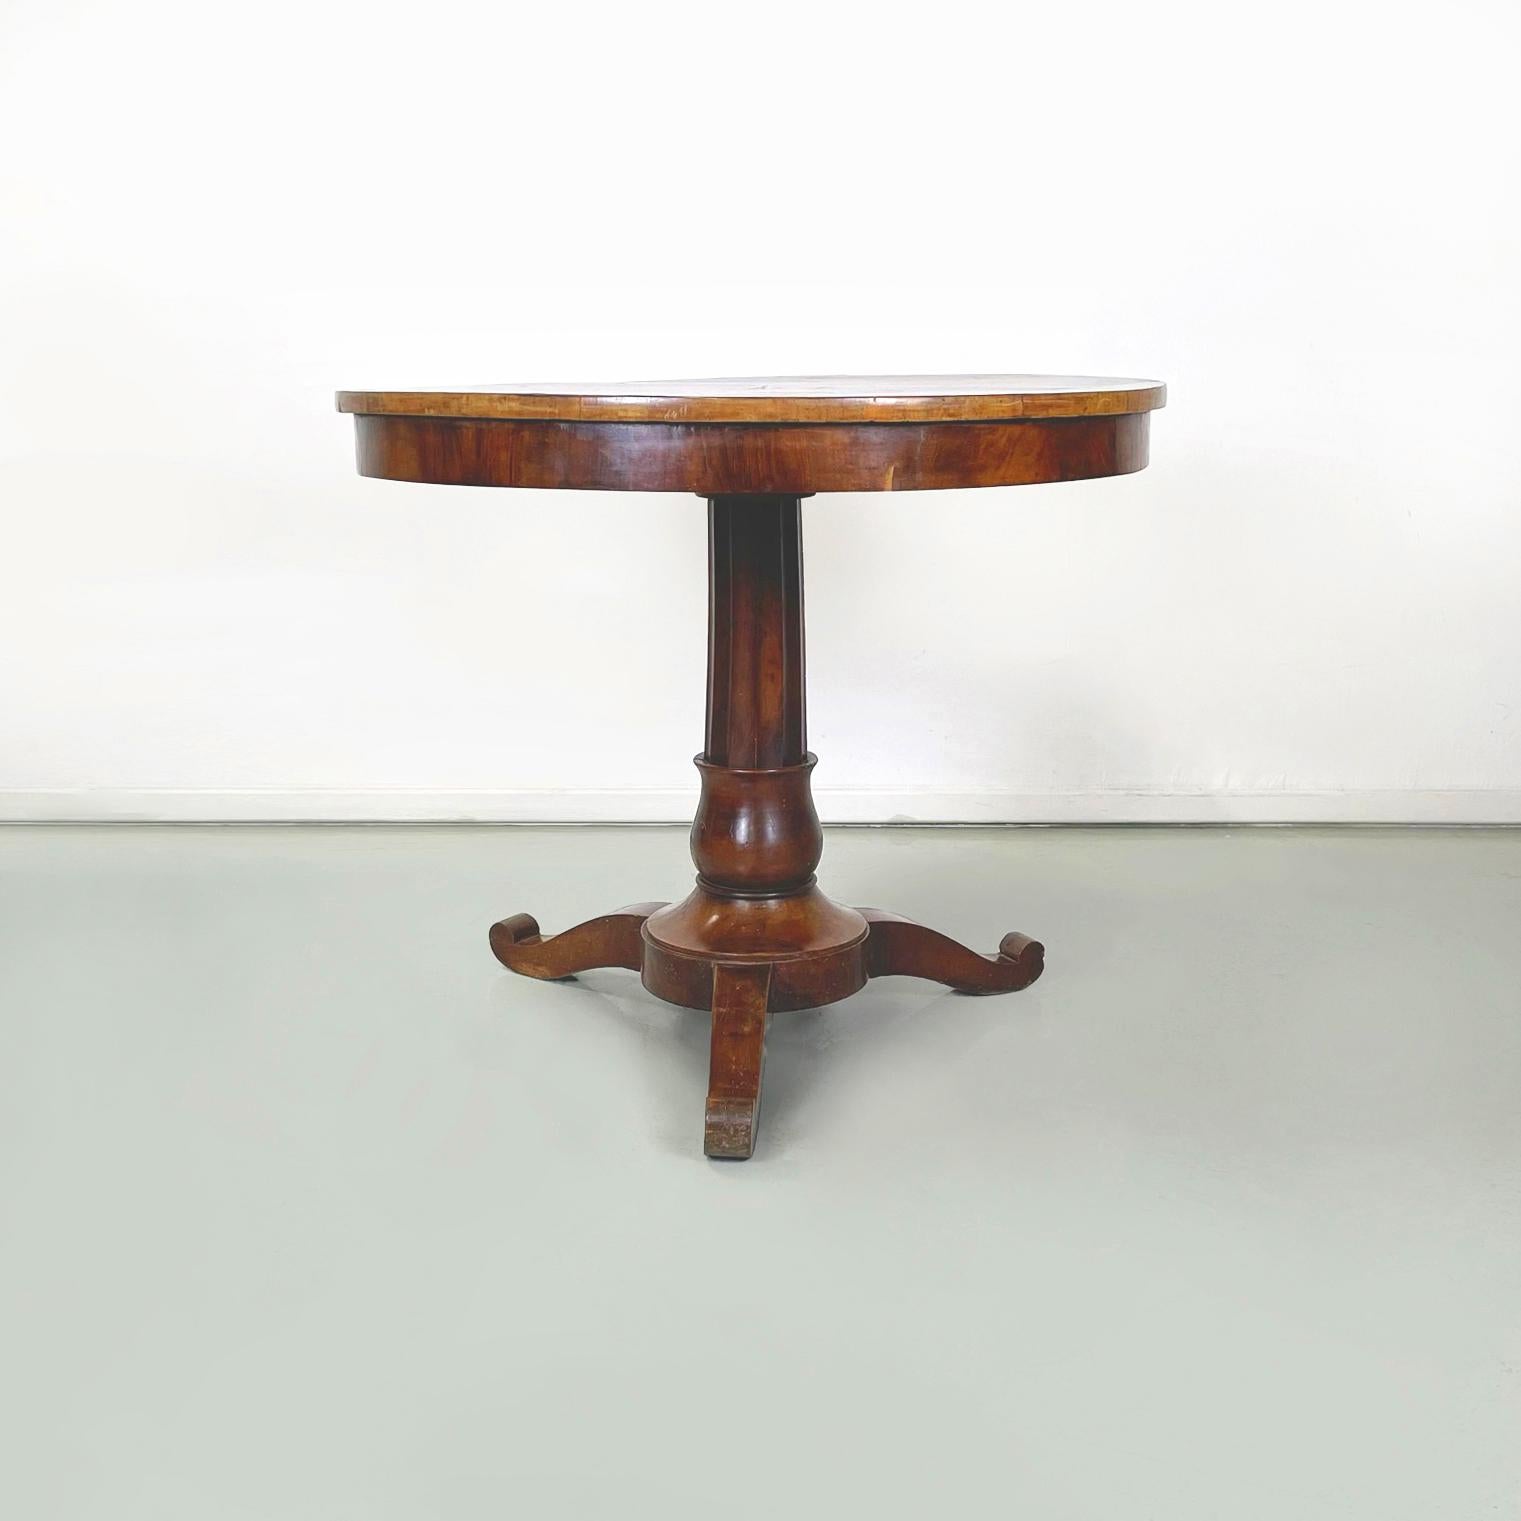 Italian antique round and finely worked wood dining table, 1800s    
Dining table with round top, entirely in solid wood. The central structure and the 3 curly legs are turned and finely worked.
1800s of Italian manufacture.
good condition, it has